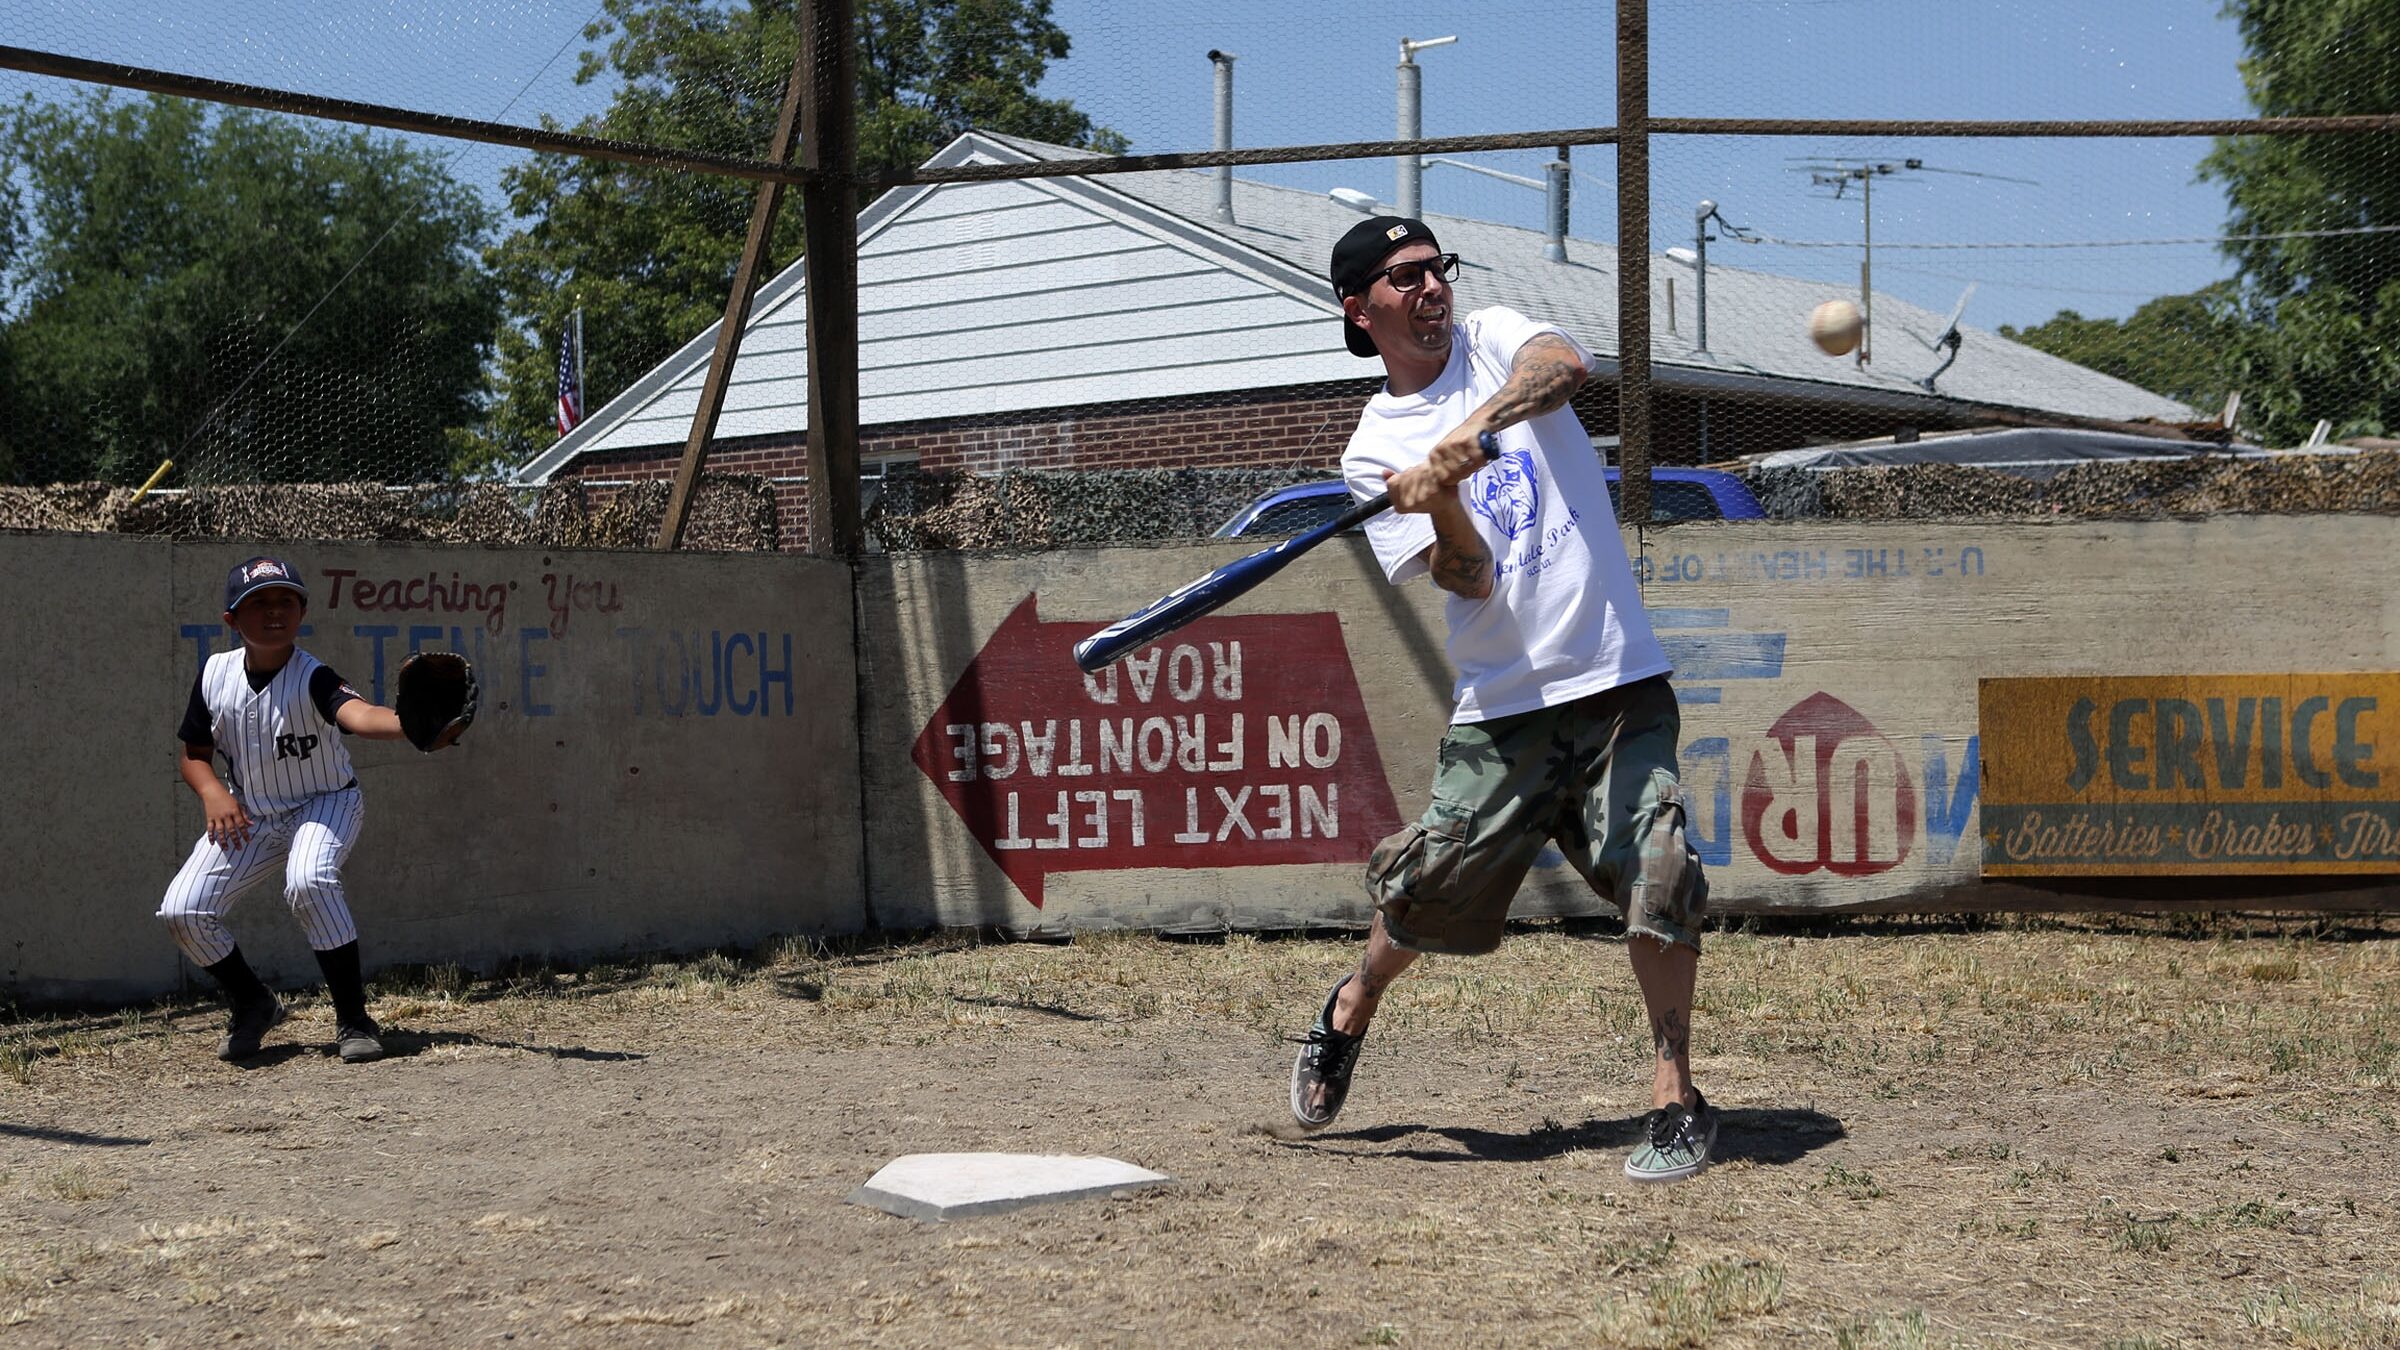 Nathan Espinoza catches as Chauncey Leopardi, who played Squints in "The Sandlot," hits the ball on...